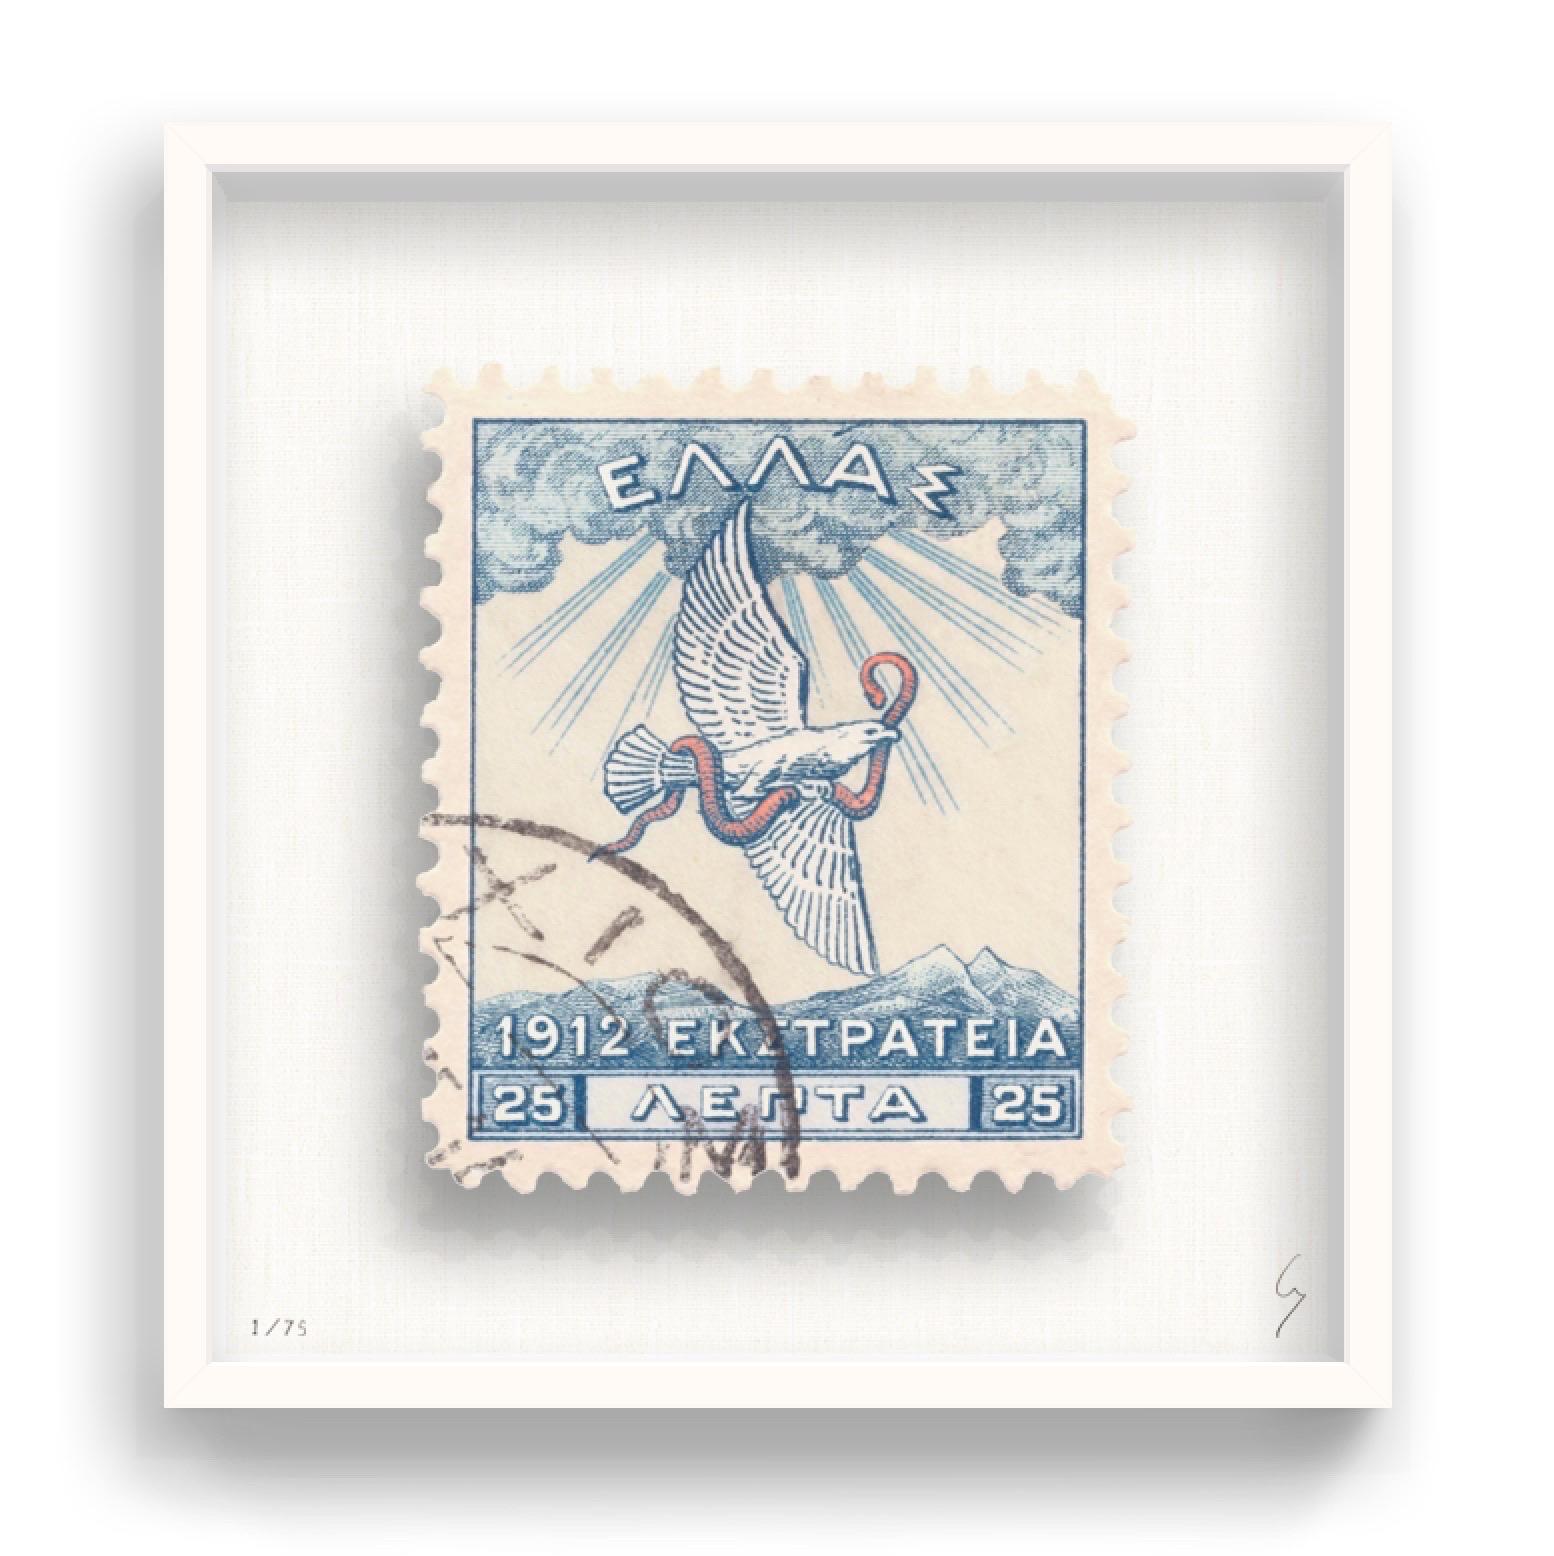 Guy Gee, Greece (medium)

Hand-engraved print on 350gsm on G.F Smith card
53 x 56cm (20 4/5 x 22 2/5 in)
Frame included 
Edition of 75 

Each artwork by Guy had been digitally reimagined from an original postage stamp. Cut out and finished by hand,